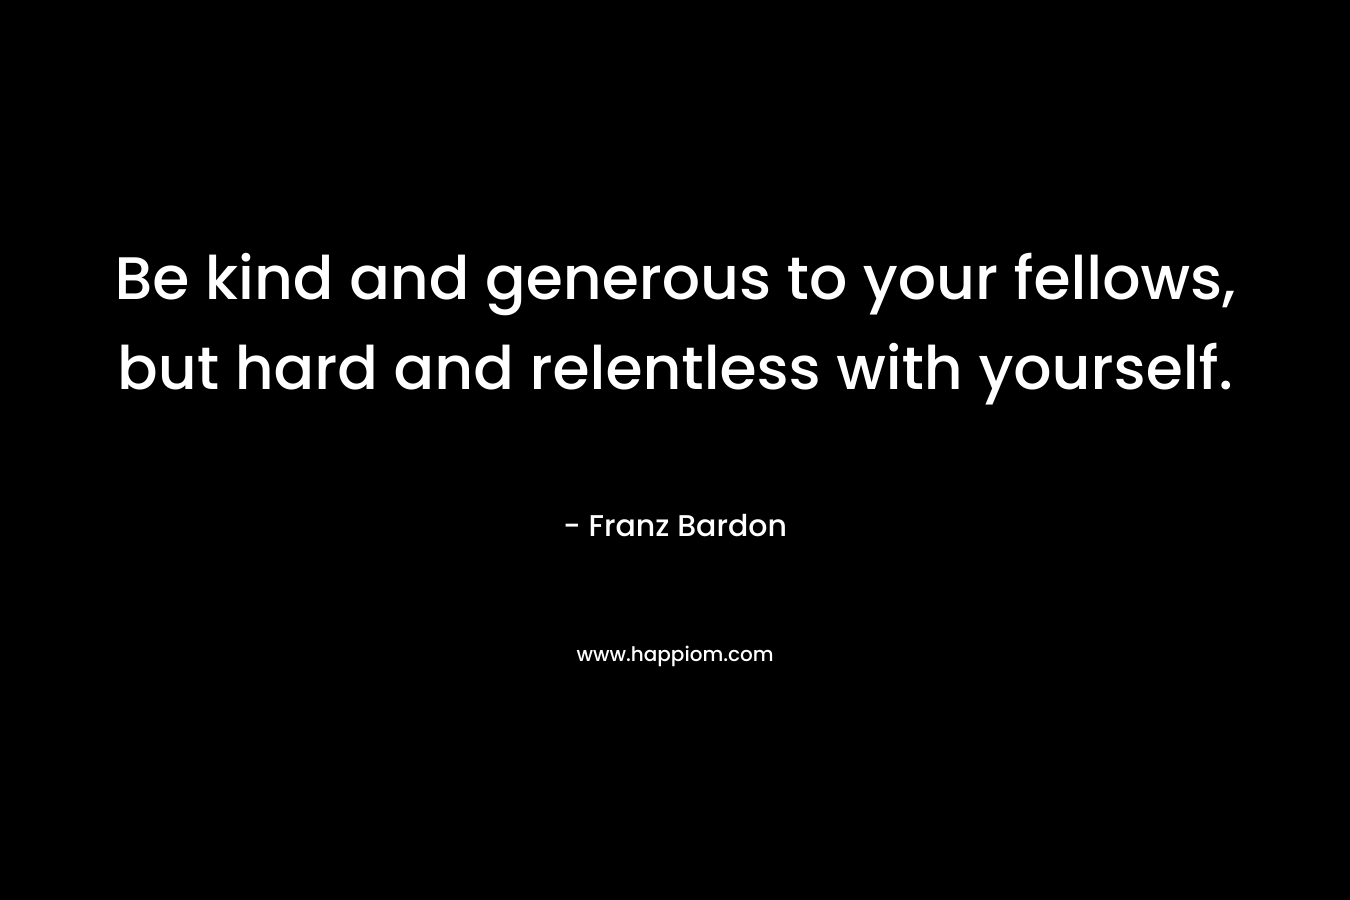 Be kind and generous to your fellows, but hard and relentless with yourself. – Franz Bardon